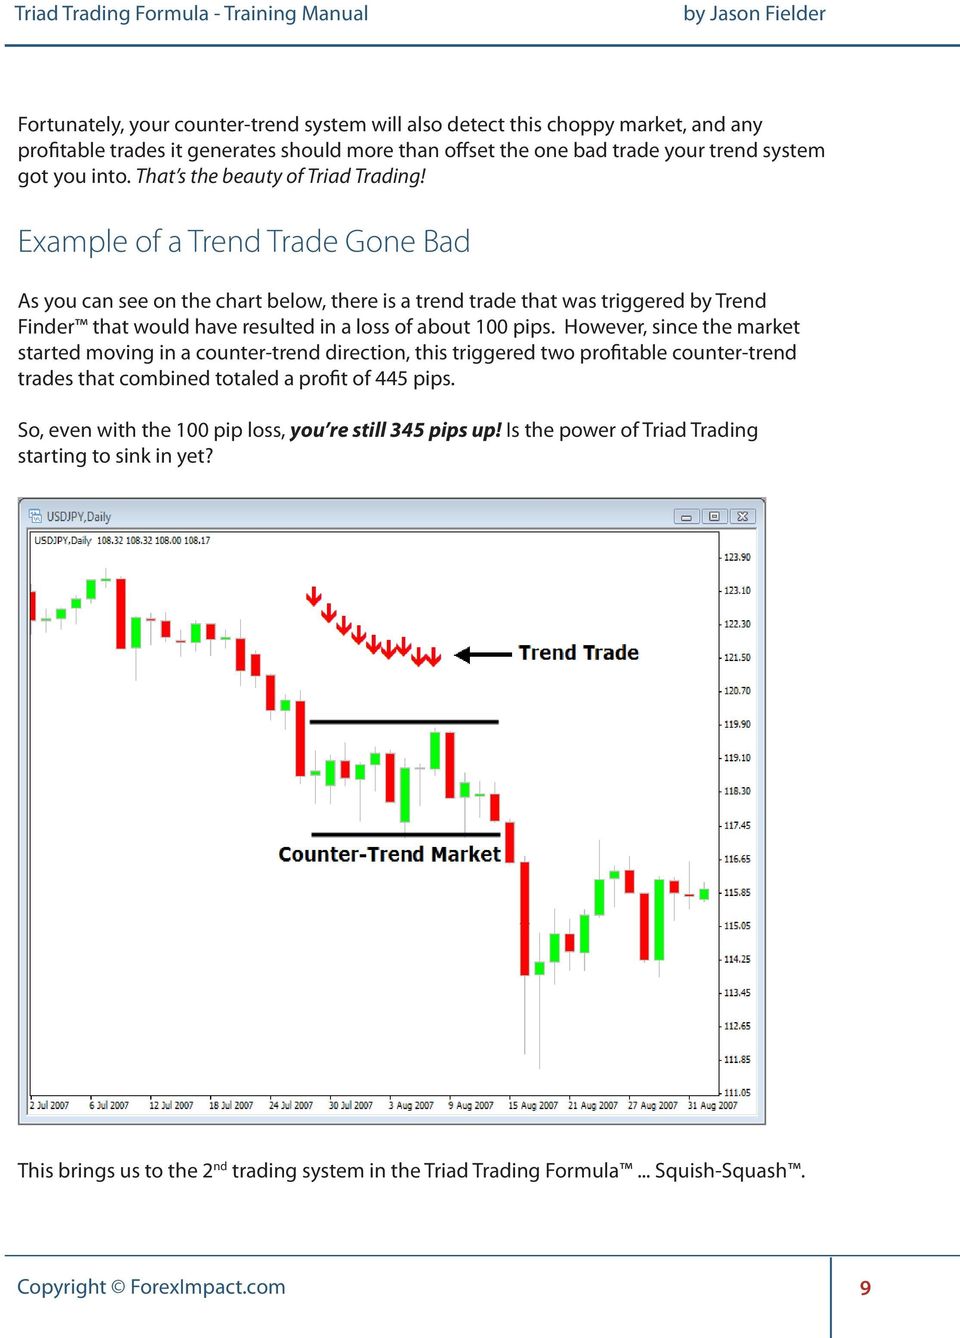 Example of a Trend Trade Gone Bad As you can see on the chart below, there is a trend trade that was triggered by Trend Finder that would have resulted in a loss of about 100 pips.